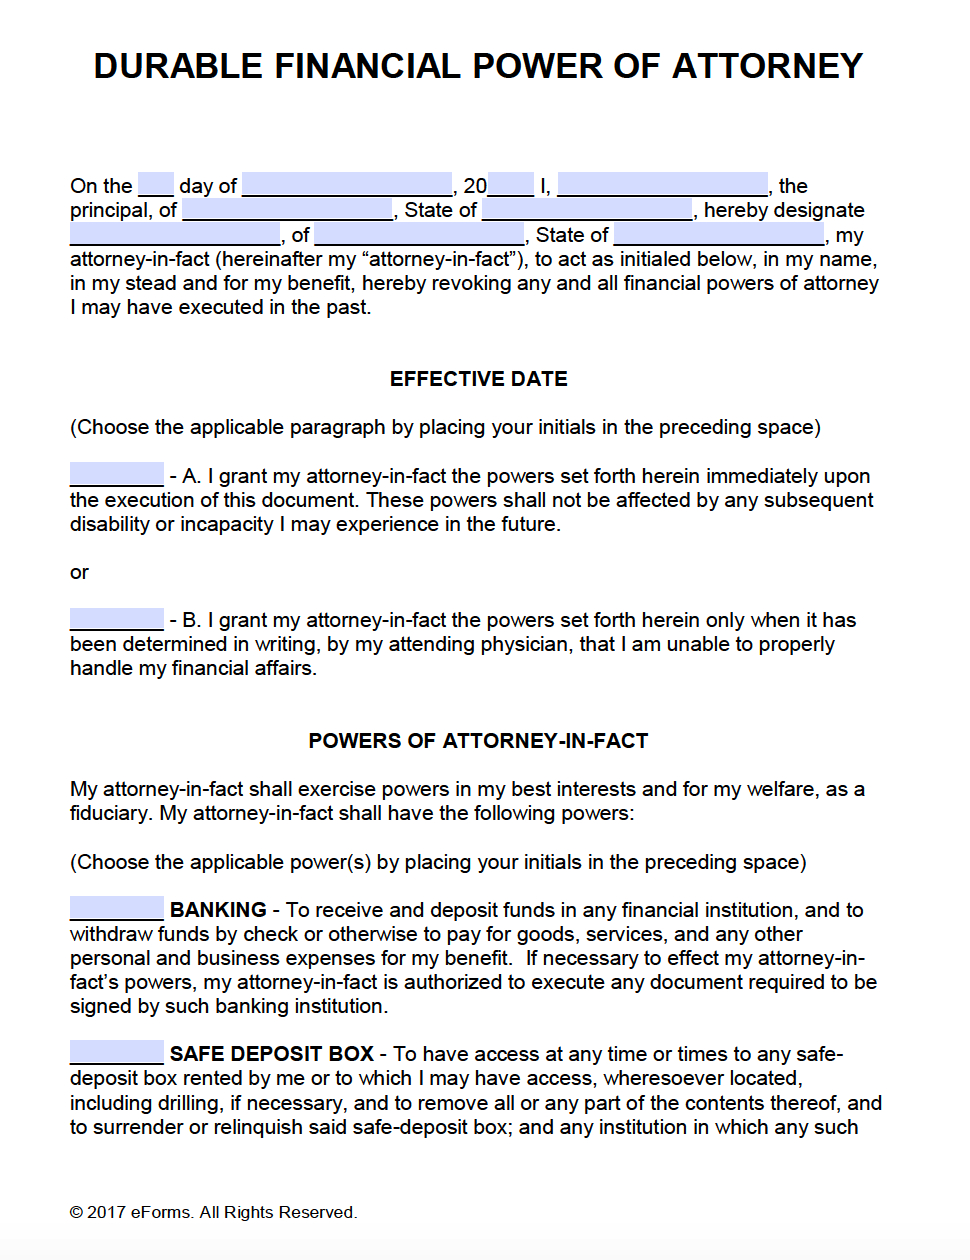 Free Printable Durable Power Of Attorney Forms - Free Printable Power Of Attorney Forms